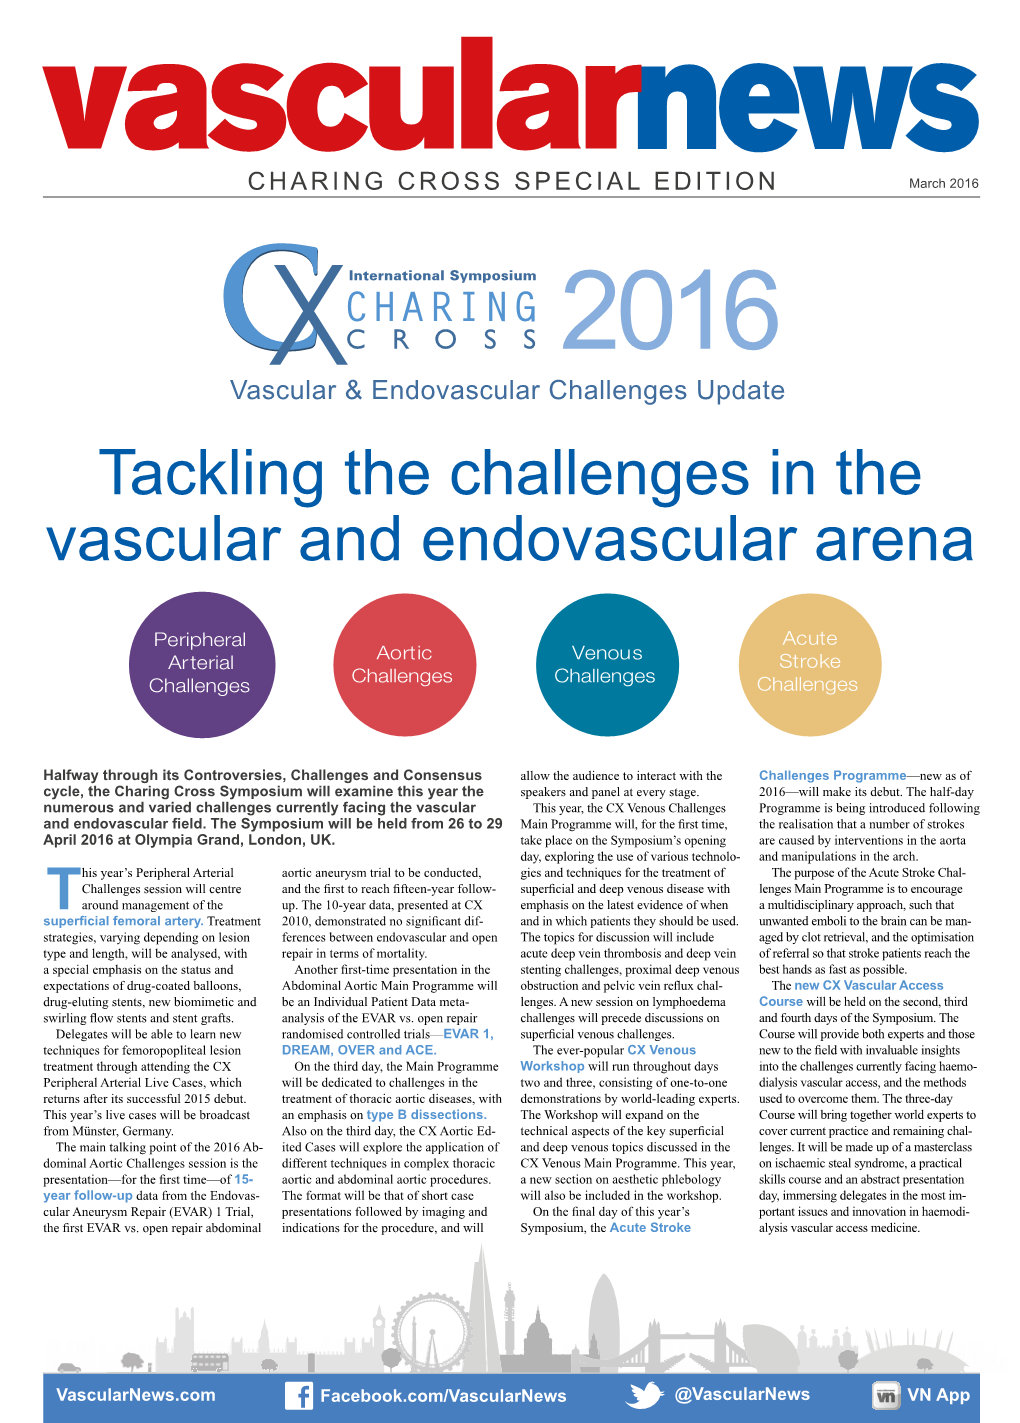 Tackling the Challenges in the Vascular and Endovascular Arena